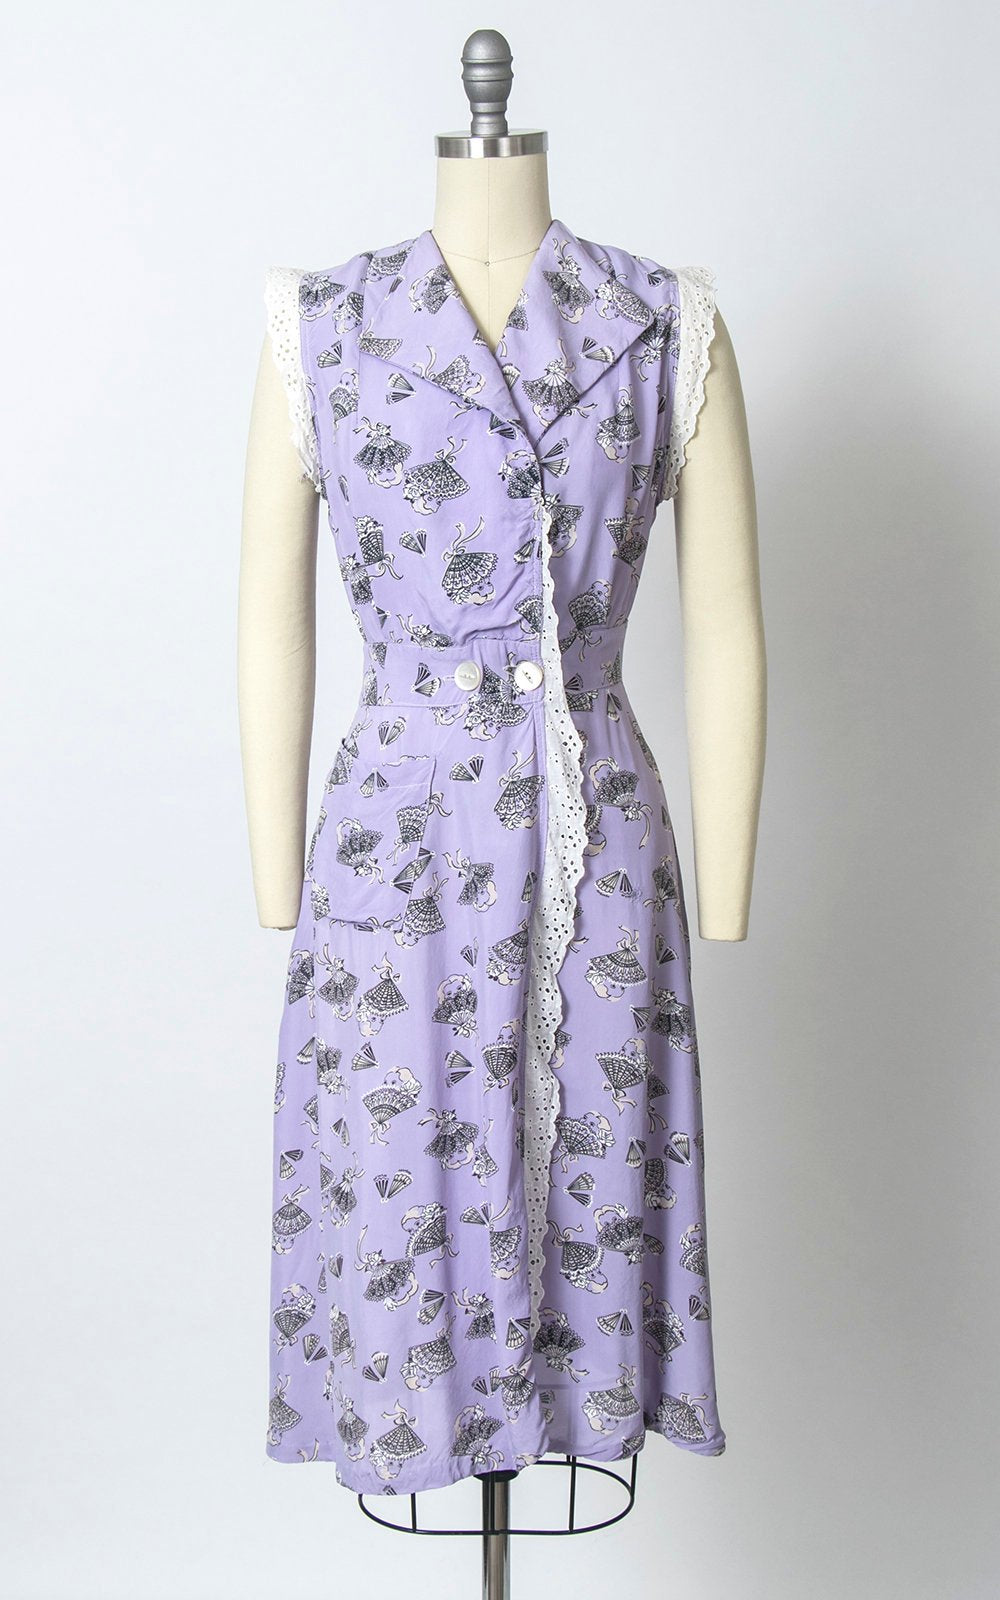 Vintage 1940s Dress | 40s Novelty Print Rayon Spanish Lady Fans Rose Floral Purple Wrap Day Dress (small)